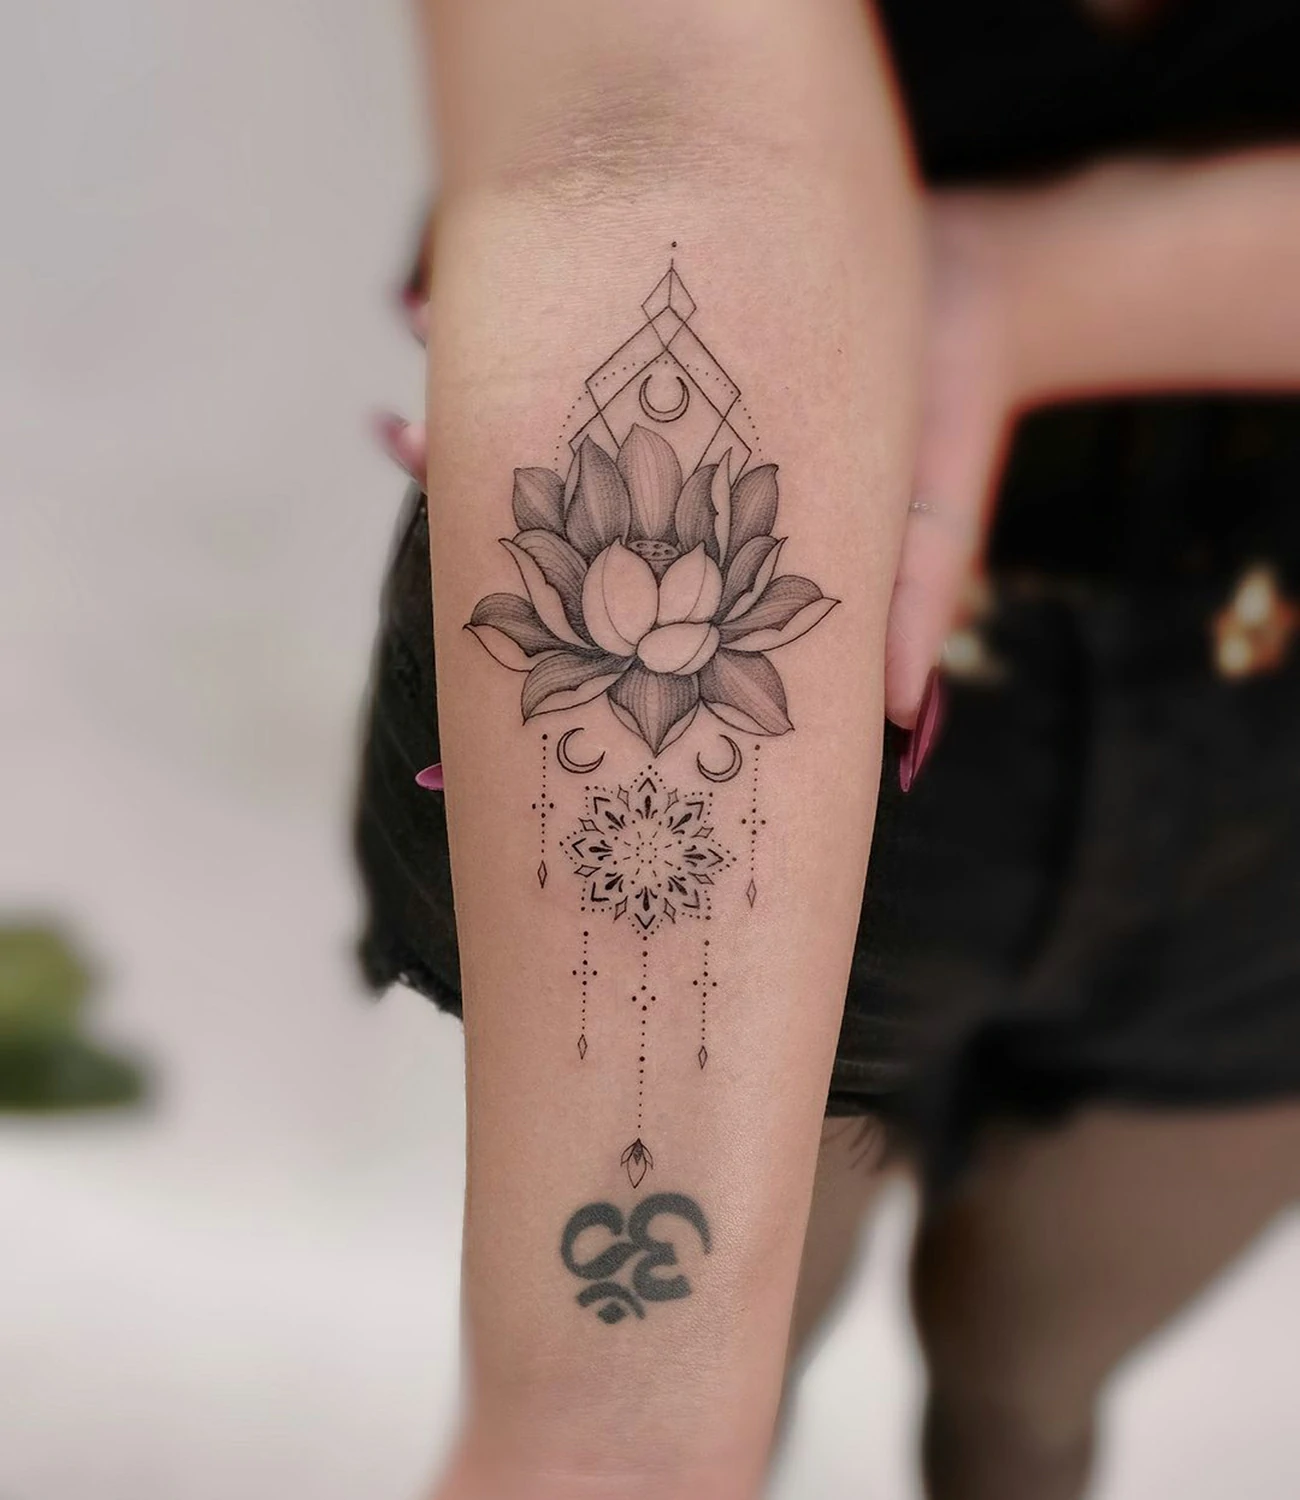 Geometric Lotus Tattoo: Geometric lotus tattoos blend the elegance of the lotus flower with geometric shapes, symbolizing purity and spiritual growth.